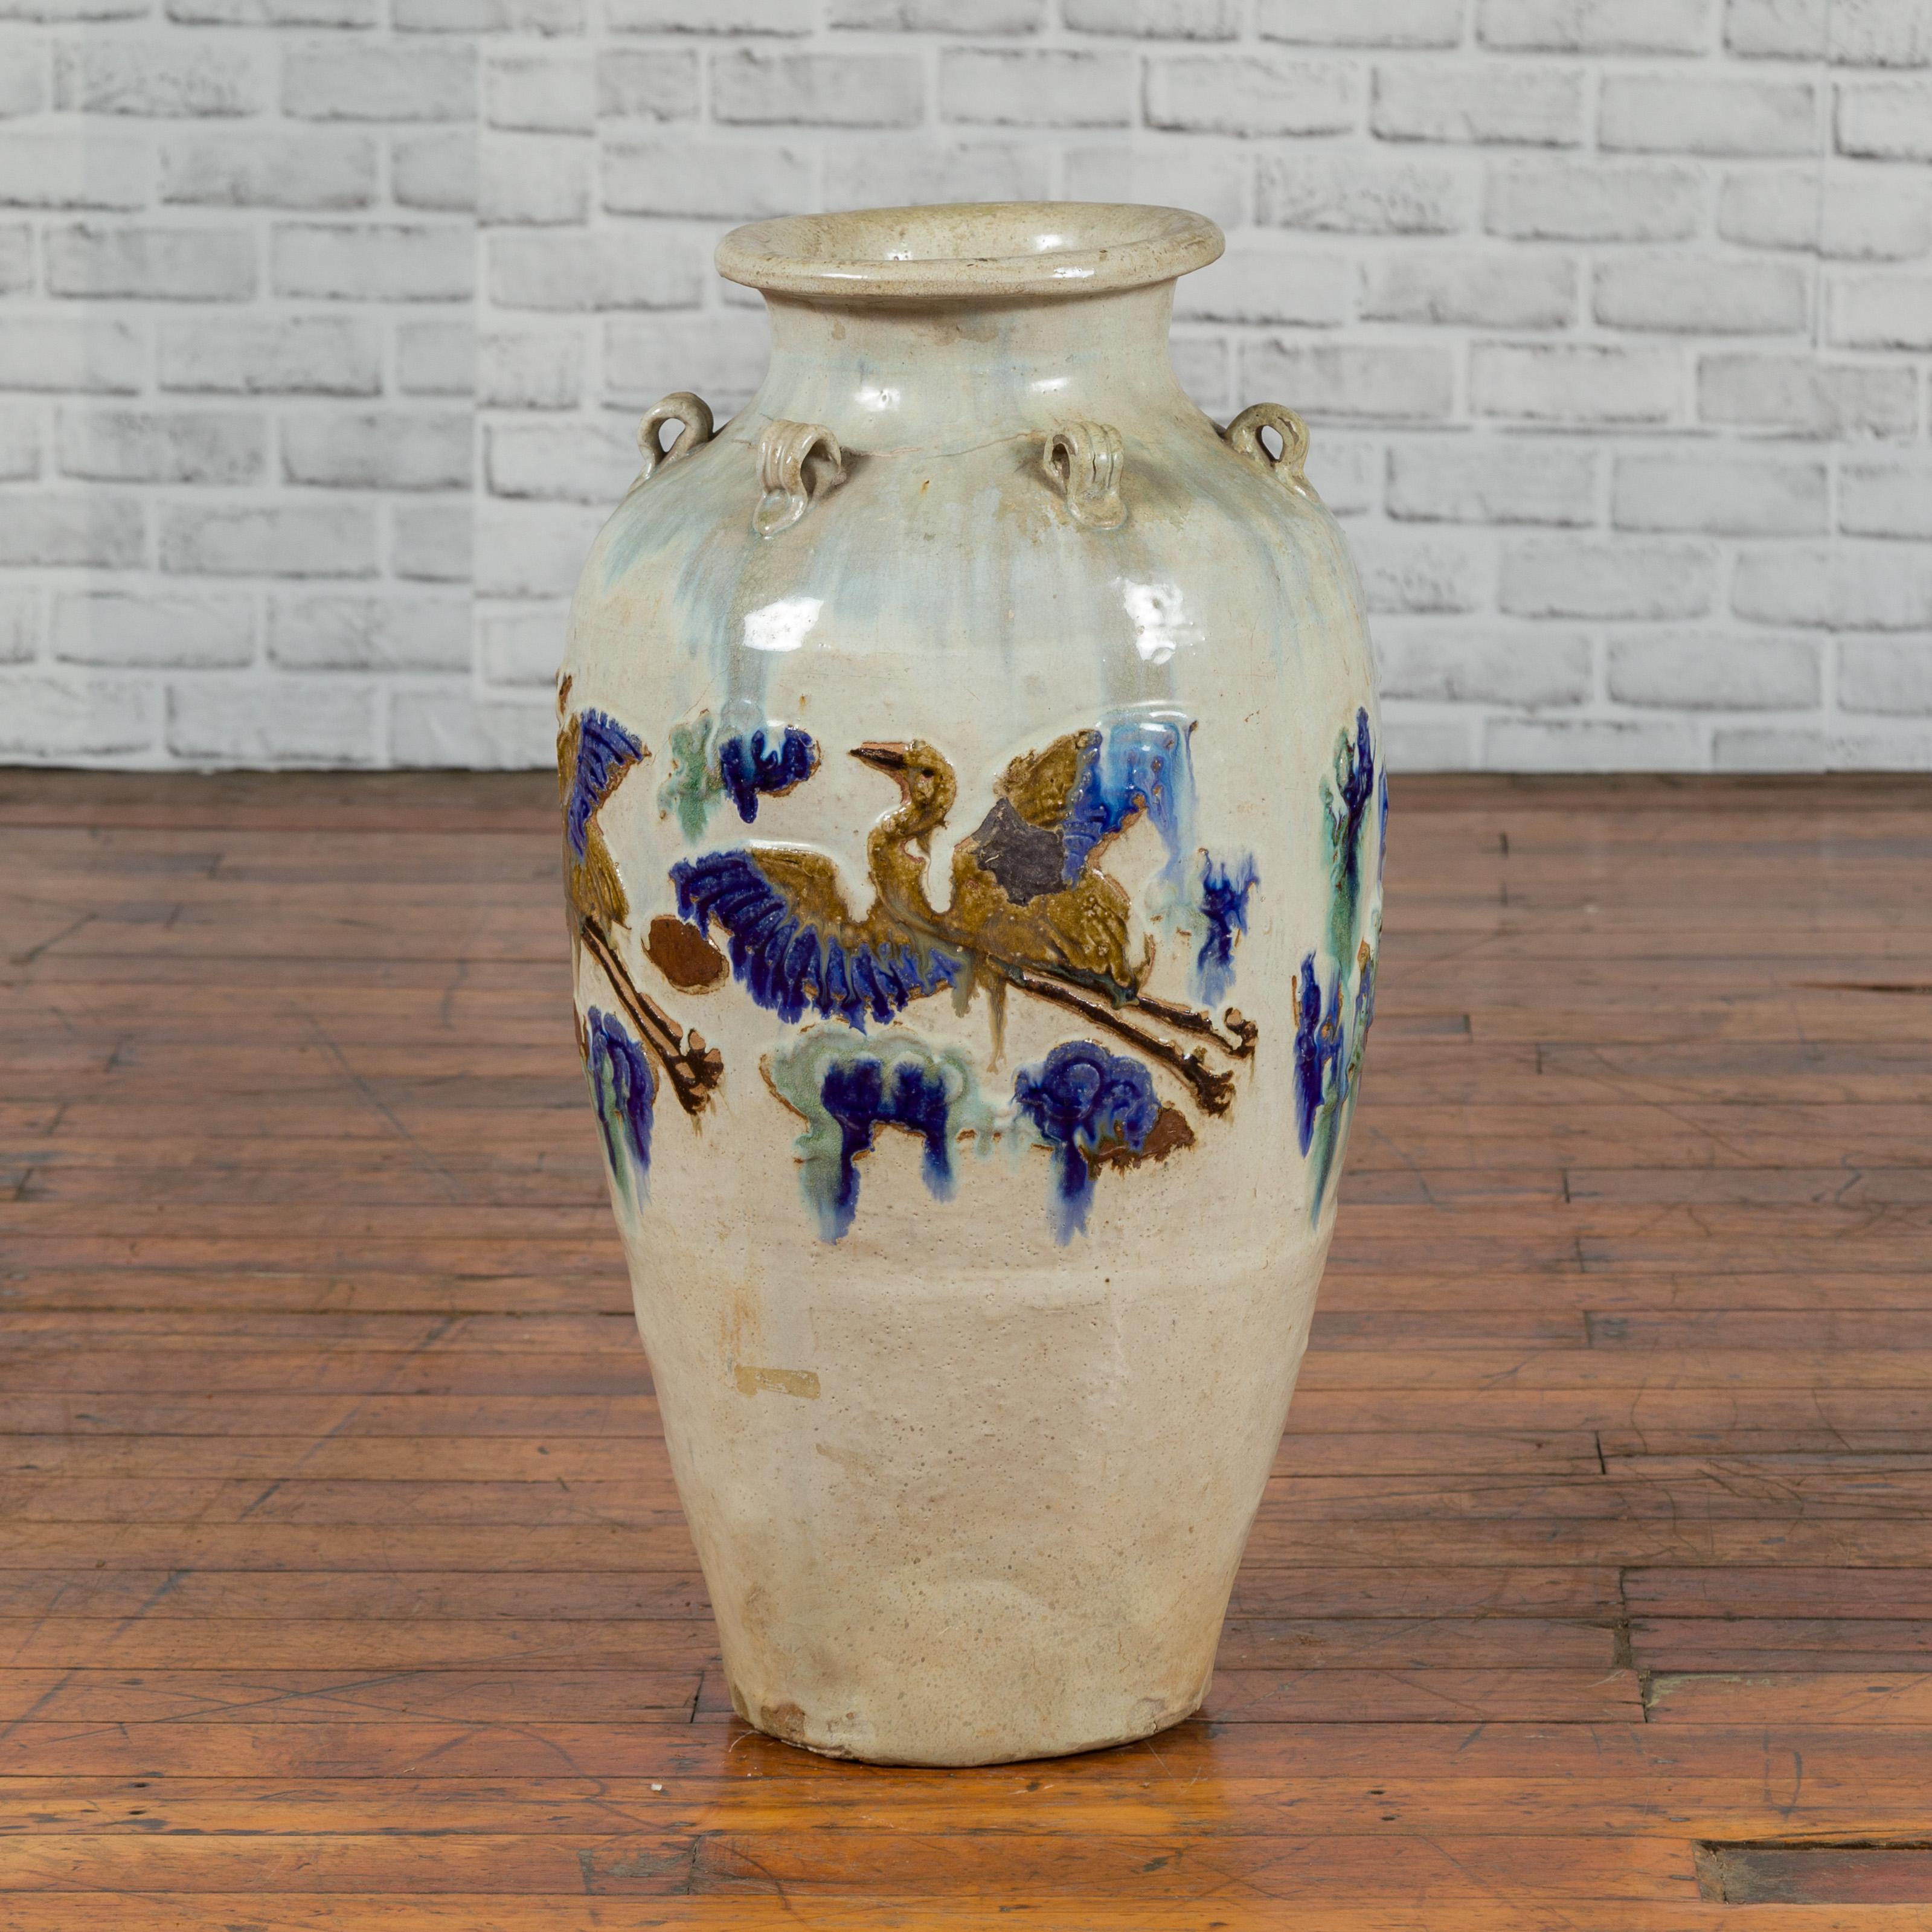 A Martaban vase from the 19th century, with white, blue and green motifs. Created during the 19th century, this Martaban vase is adorned with a series of petite loop handles through which a rope would have been passed to secure a top. The belly